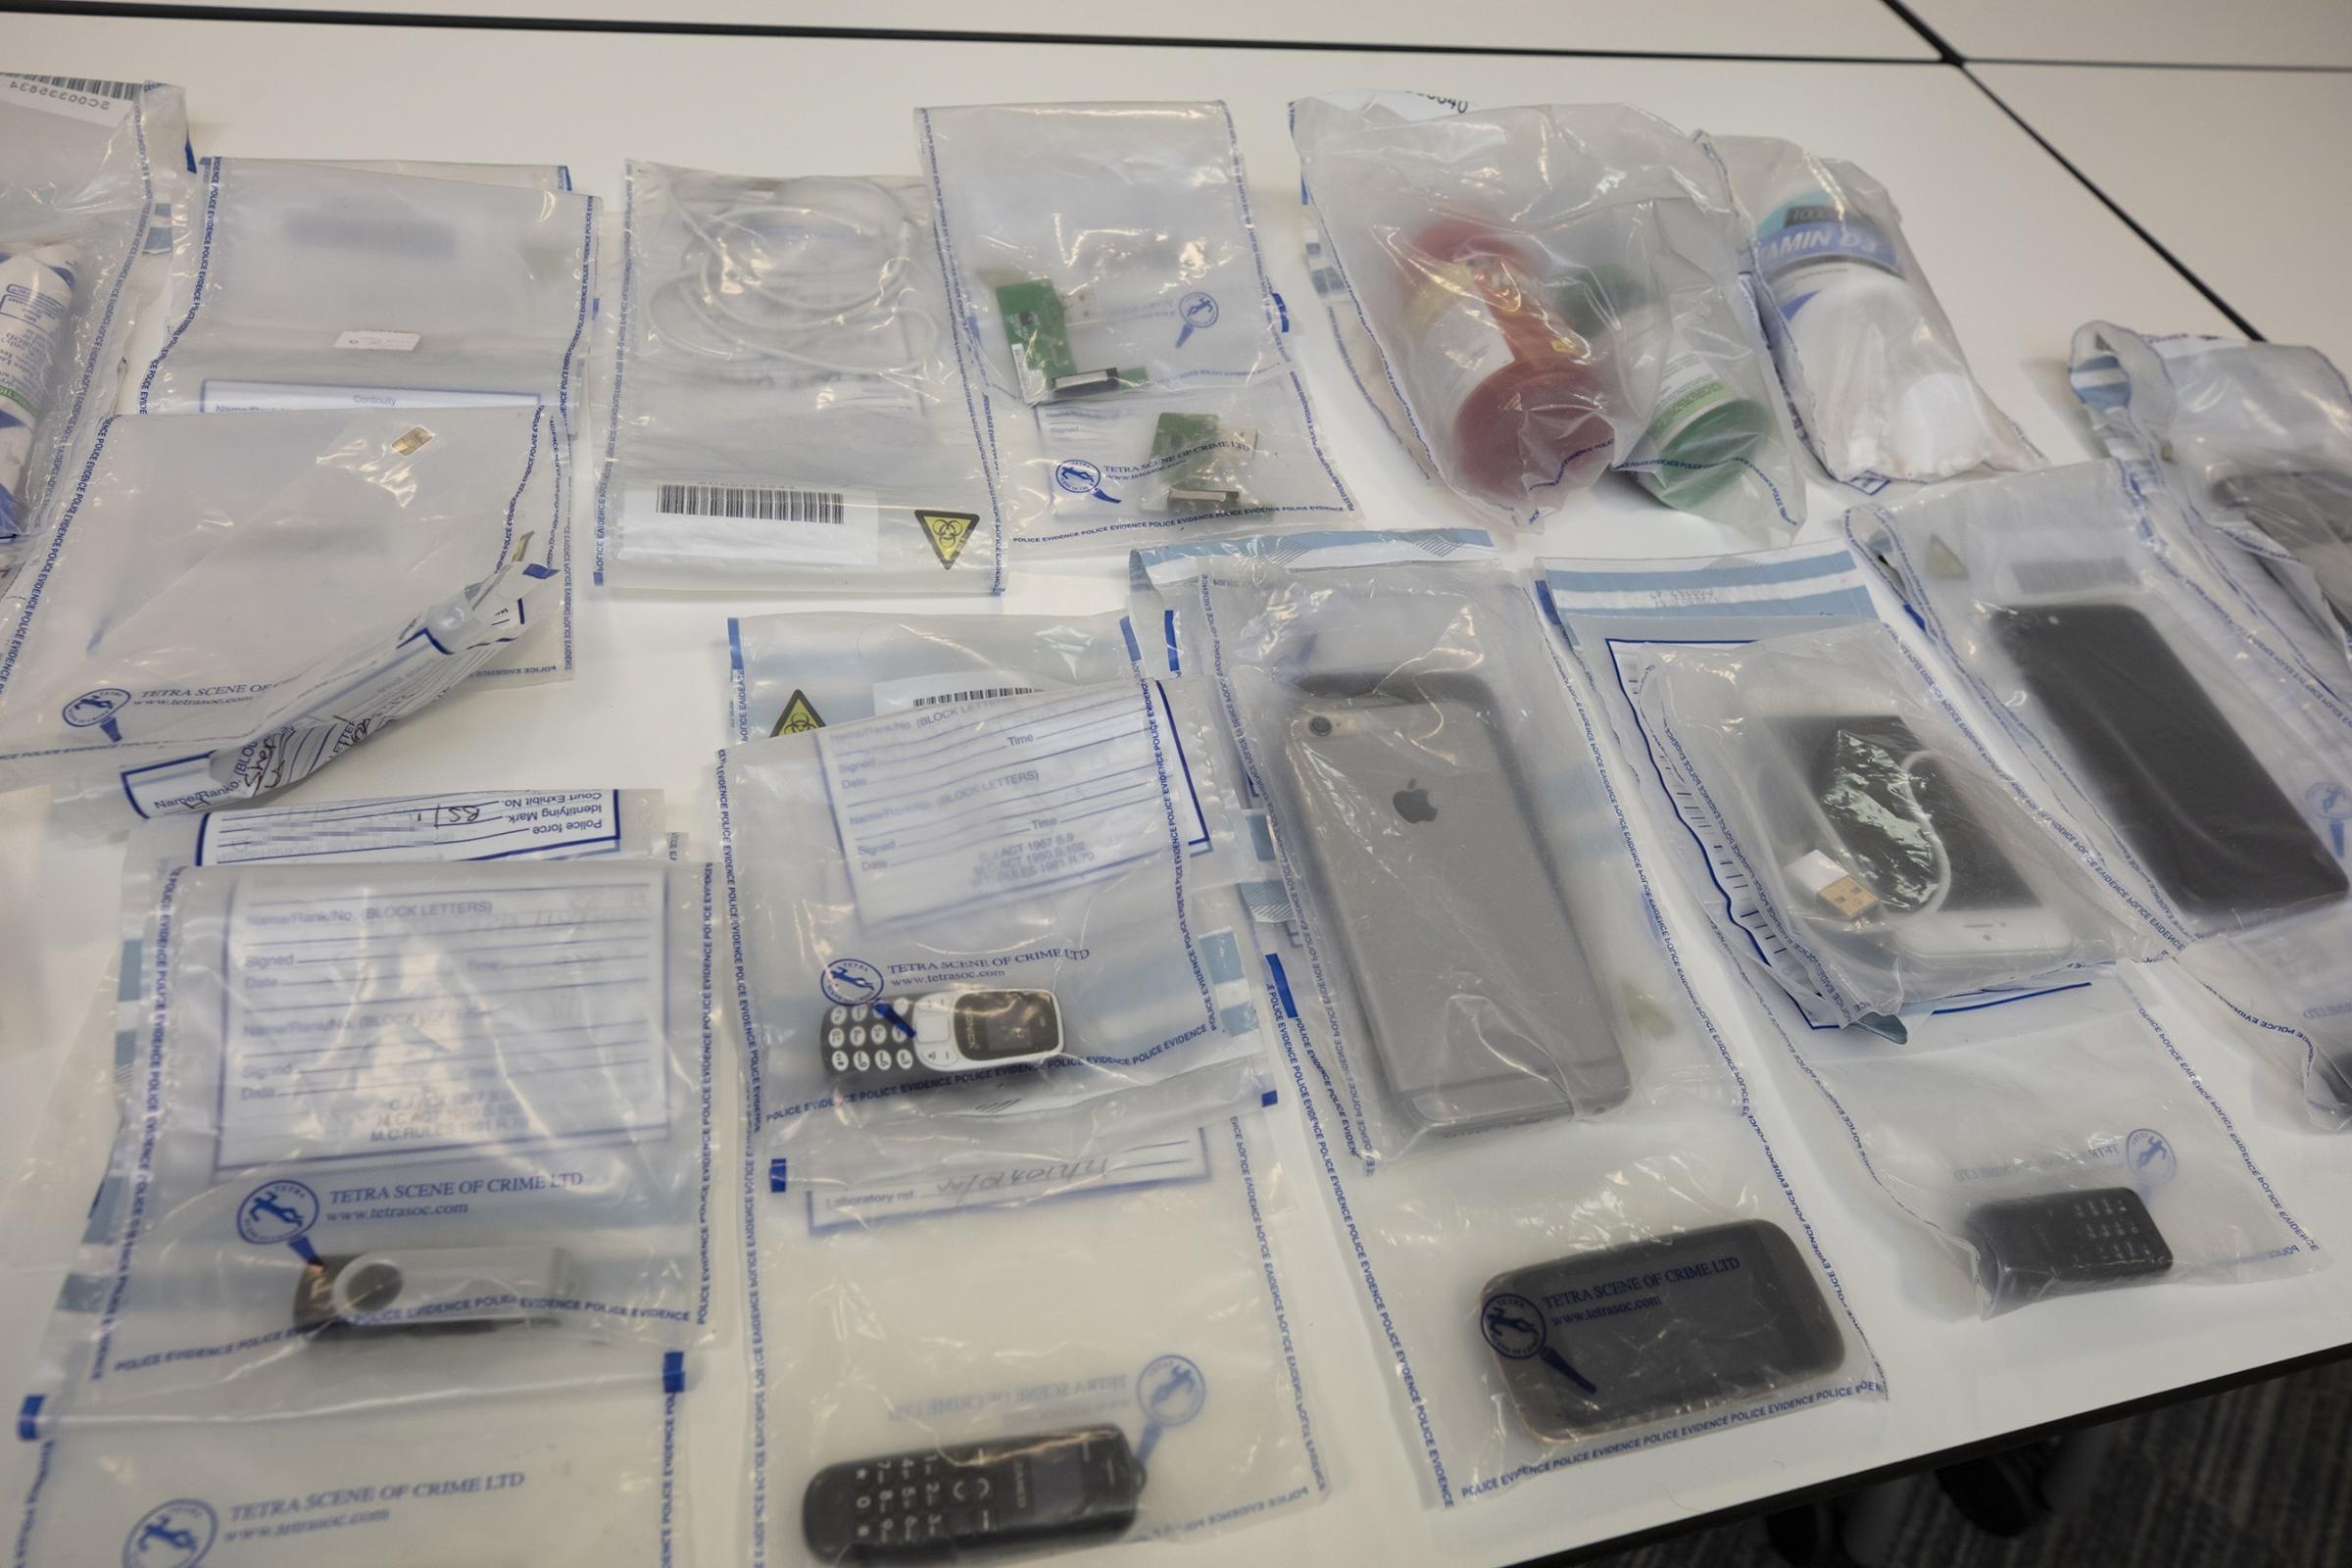 Some of the seized items